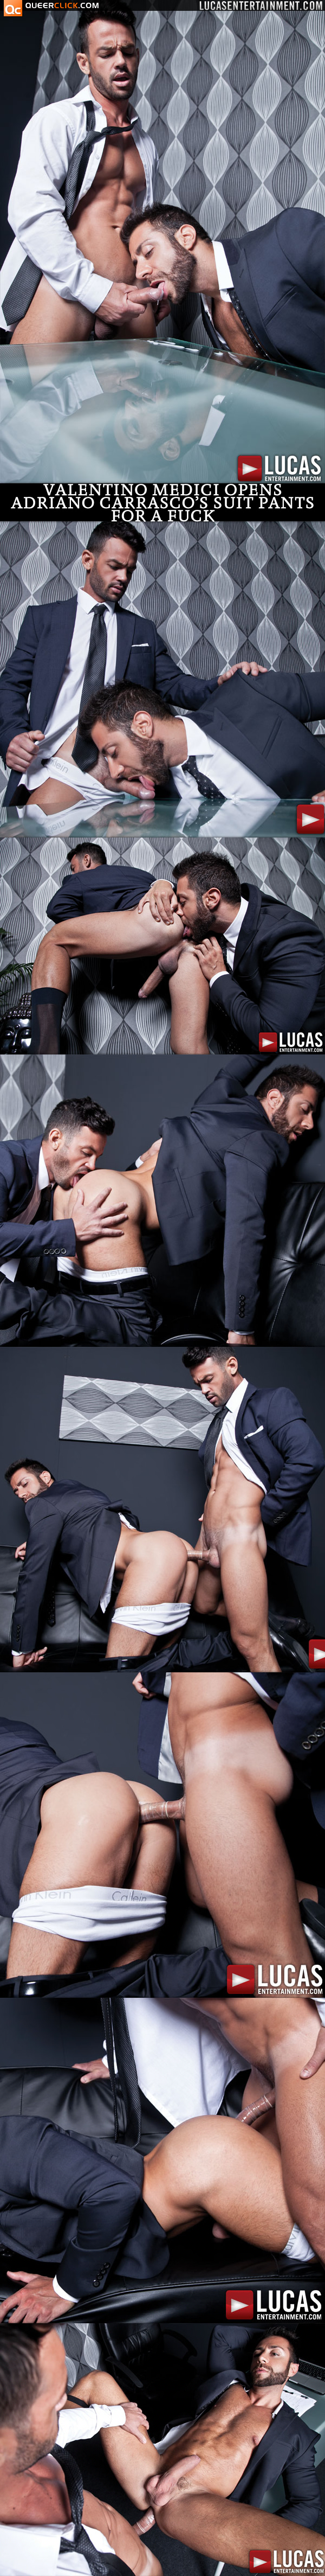 Lucas Entertainment VALENTINO MEDICI OPENS ADRIANO CARRASCO'S SUIT PANTS FOR A FUCK